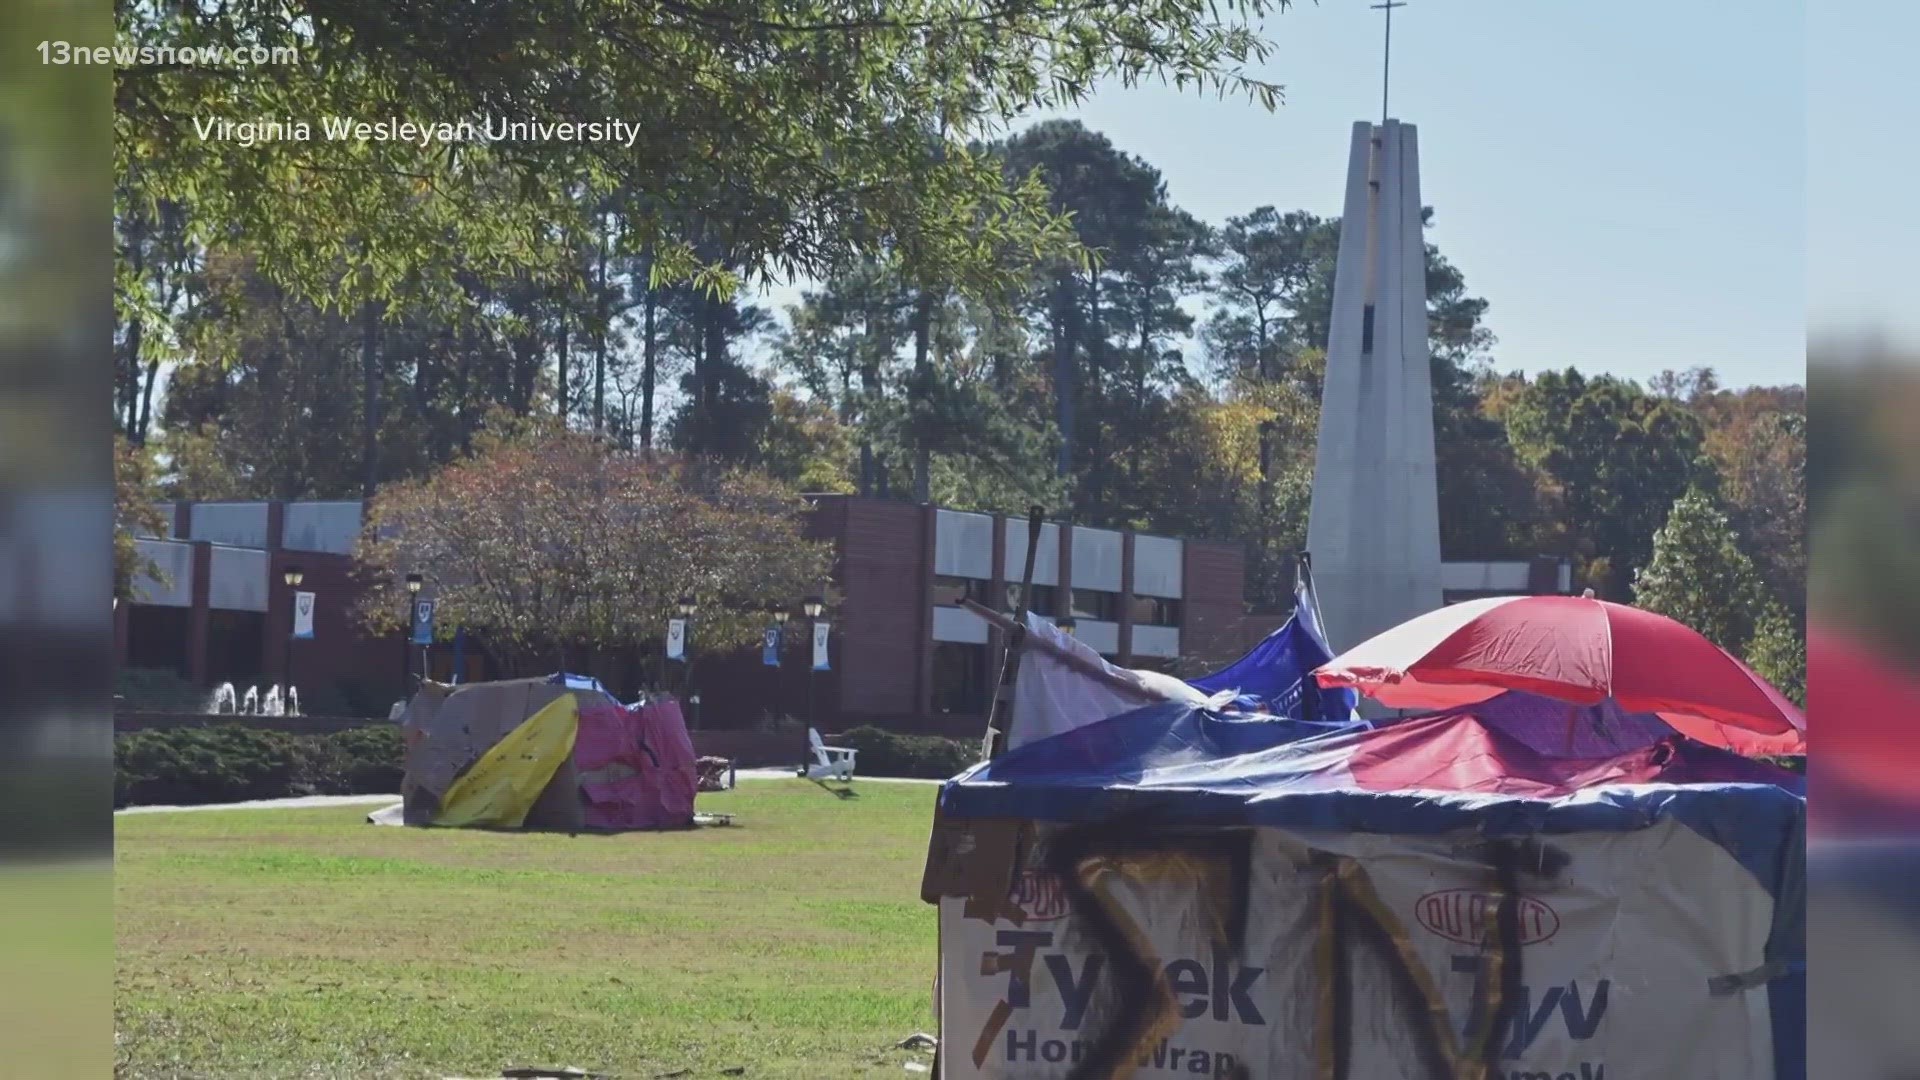 The event is called "Shack-A-Thon." Students will make their own shelter and sleep outside on the university's lawn.